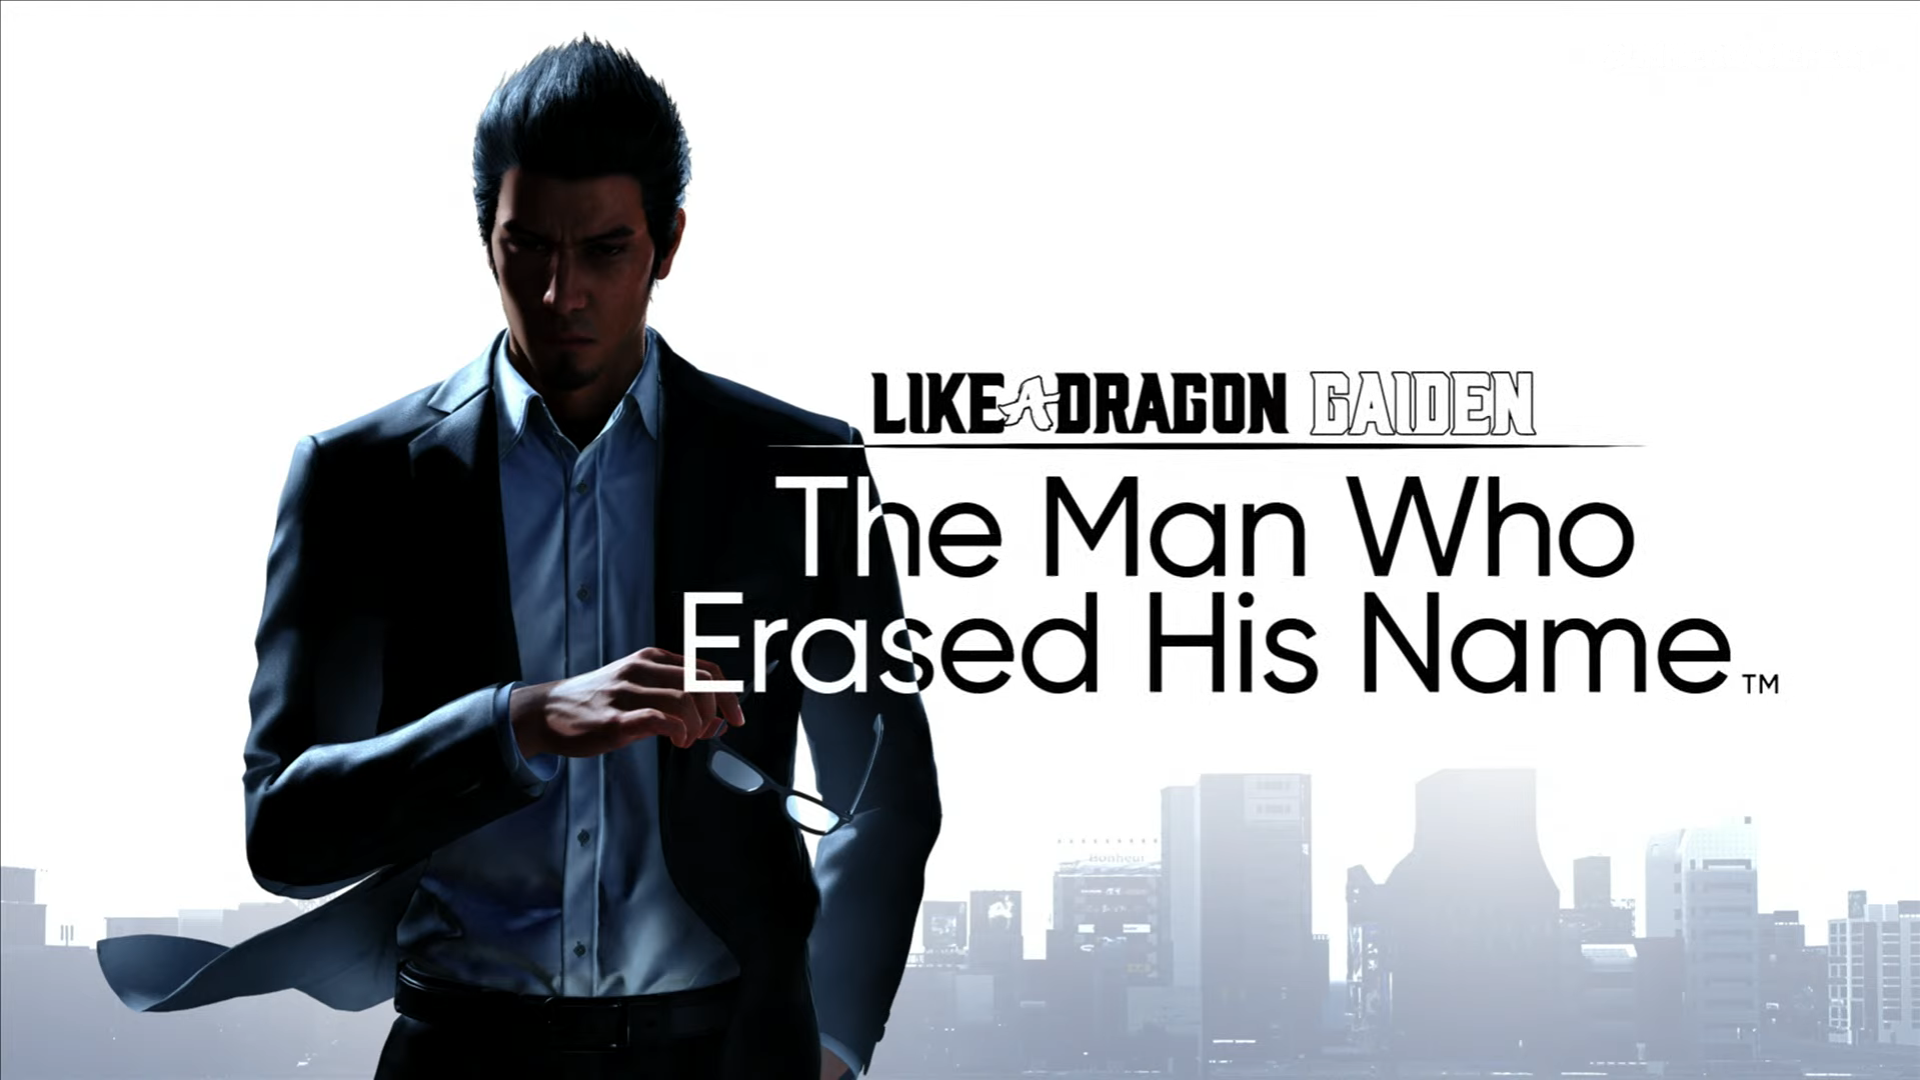 Like a Dragon Gaiden: The Man Who Erased His Name Officially Shares Release Date and Trailer